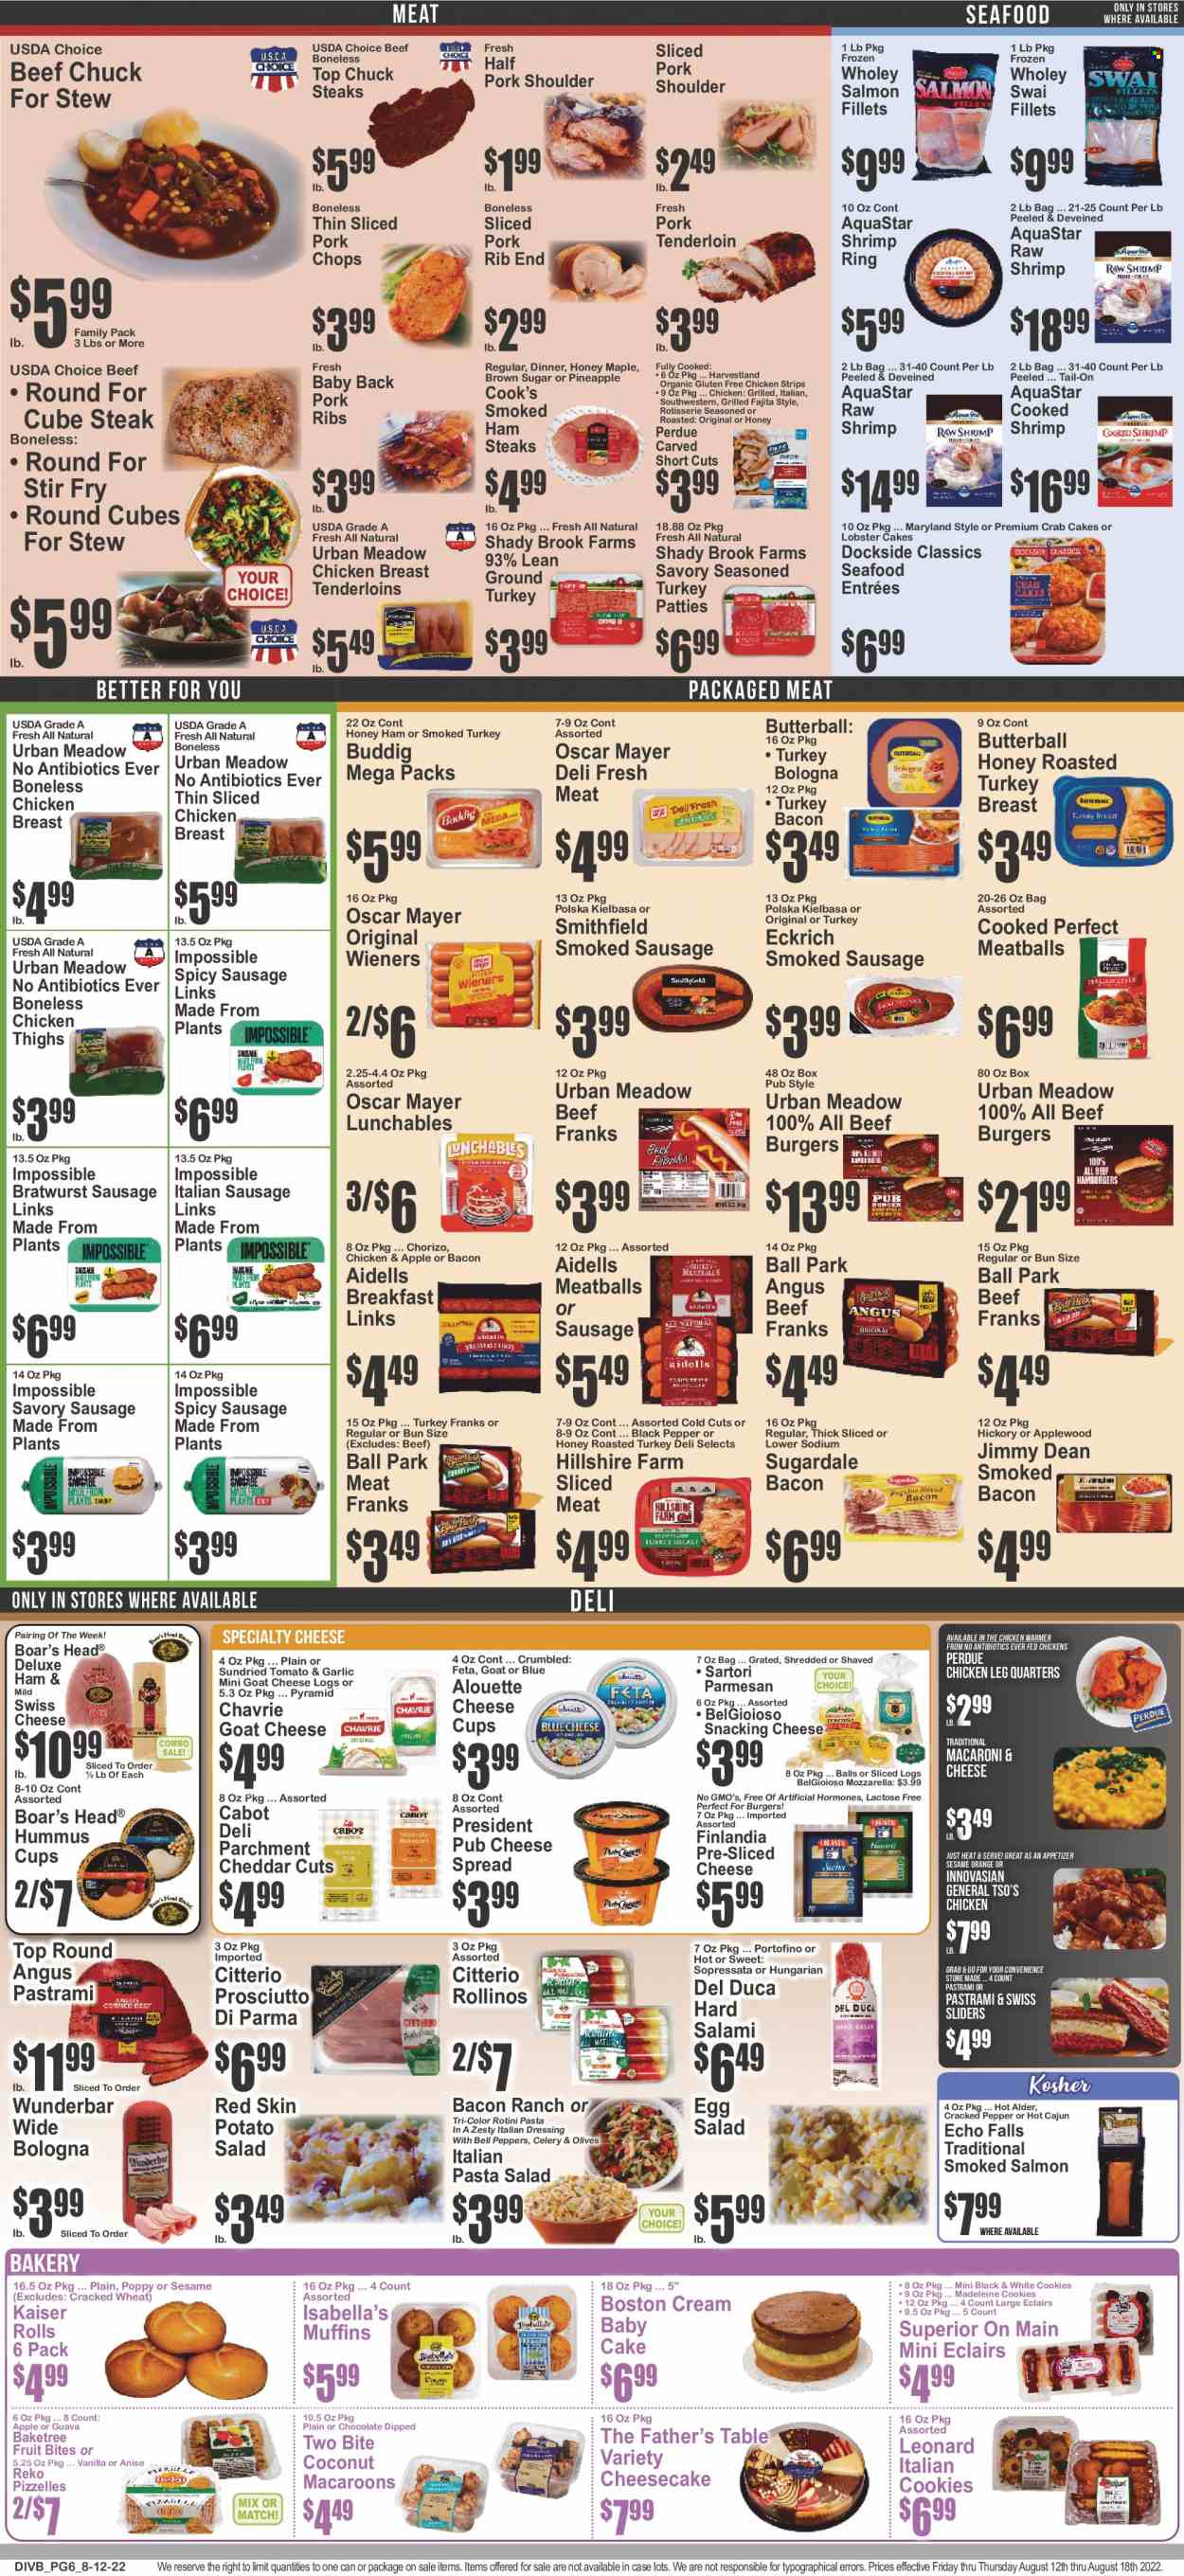 thumbnail - Food Dynasty Flyer - 08/12/2022 - 08/18/2022 - Sales products - Father's Table, cheesecake, muffin, celery, salad, guava, oranges, lobster, salmon, salmon fillet, smoked salmon, seafood, shrimps, swai fillet, crab cake, lobster cakes, macaroni & cheese, meatballs, hamburger, pasta, fajita, beef burger, Perdue®, Lunchables, Jimmy Dean, Sugardale, bacon, Butterball, salami, turkey bacon, ham, Hillshire Farm, prosciutto, pastrami, chorizo, smoked ham, Cook's, Oscar Mayer, bratwurst, sausage, smoked sausage, italian sausage, kielbasa, hummus, cheese spread, potato salad, pasta salad, ham steaks, goat cheese, sliced cheese, swiss cheese, cheese cup, parmesan, pub cheese, Président, feta, italian dressing, strips, chicken strips, cookies, chocolate, cane sugar, olives, black pepper, dressing, ground turkey, chicken breasts, chicken legs, chicken thighs, beef meat, steak, pork meat, pork ribs, pork shoulder, pork tenderloin, pork back ribs, cup. Page 6.